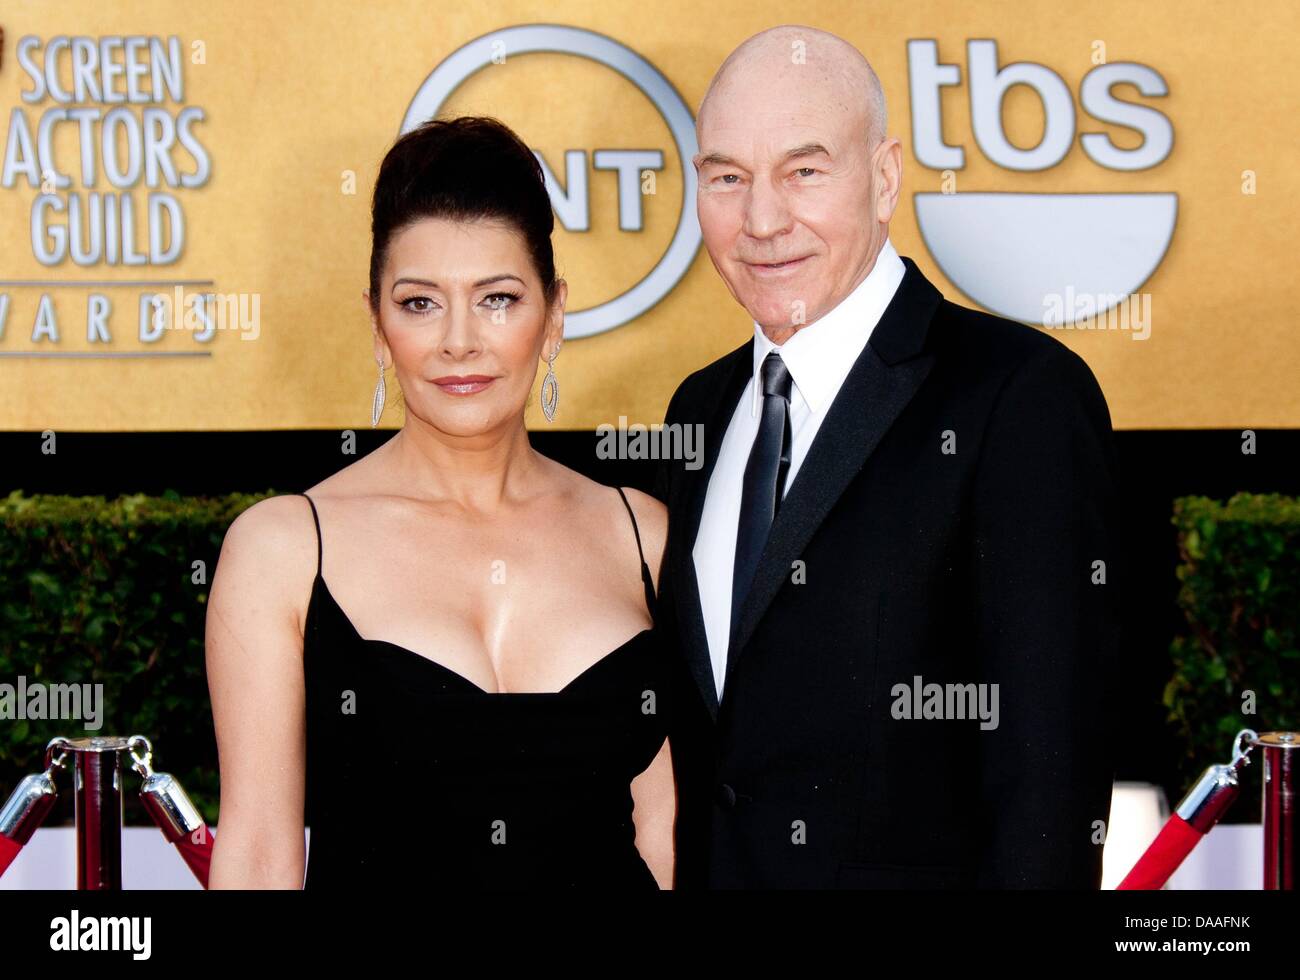 British actors Patrick Stewart (R) and Marina Sirtis (L) arrive for the 17th Annual Screen Actors Guild Awards held at Shrine Auditorium in Los Angeles, California, USA, 30 January 2011. Photo: Hubert Boesl Stock Photo